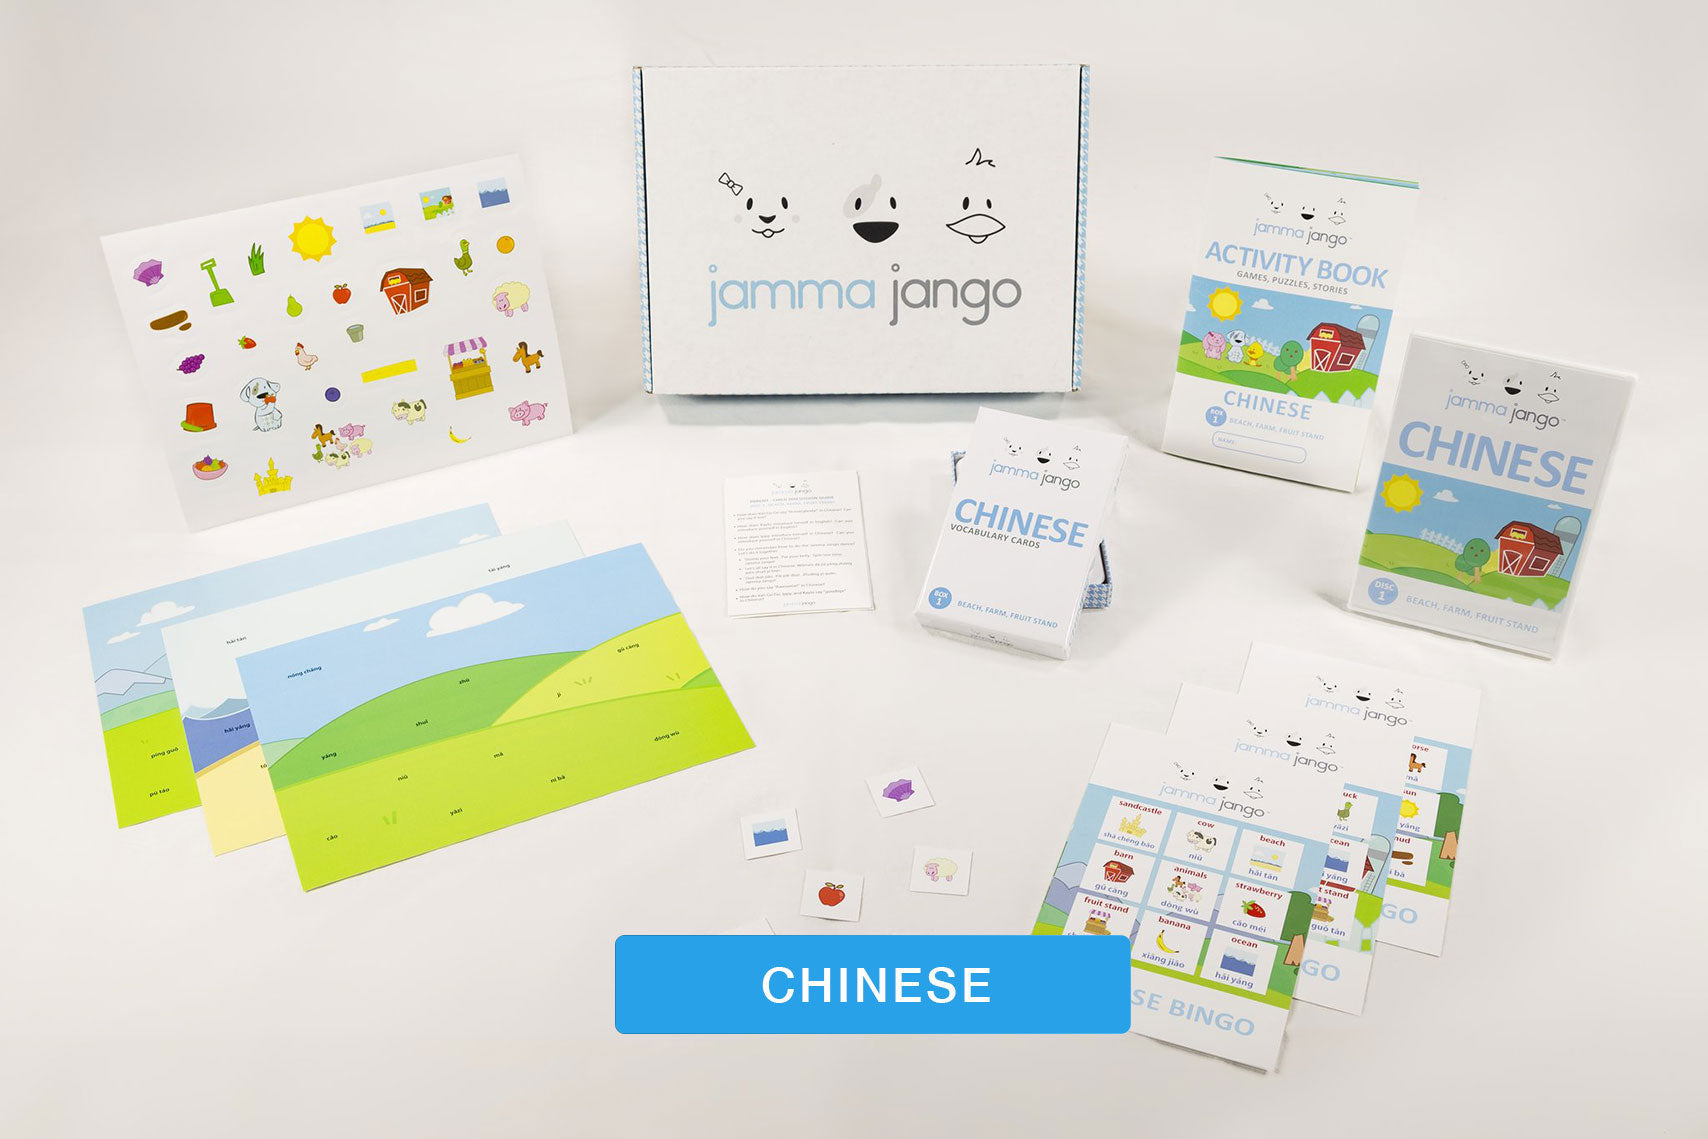 Photo showing Chinese flashcards, games to learn Mandarin, and more from Jamma Jango.